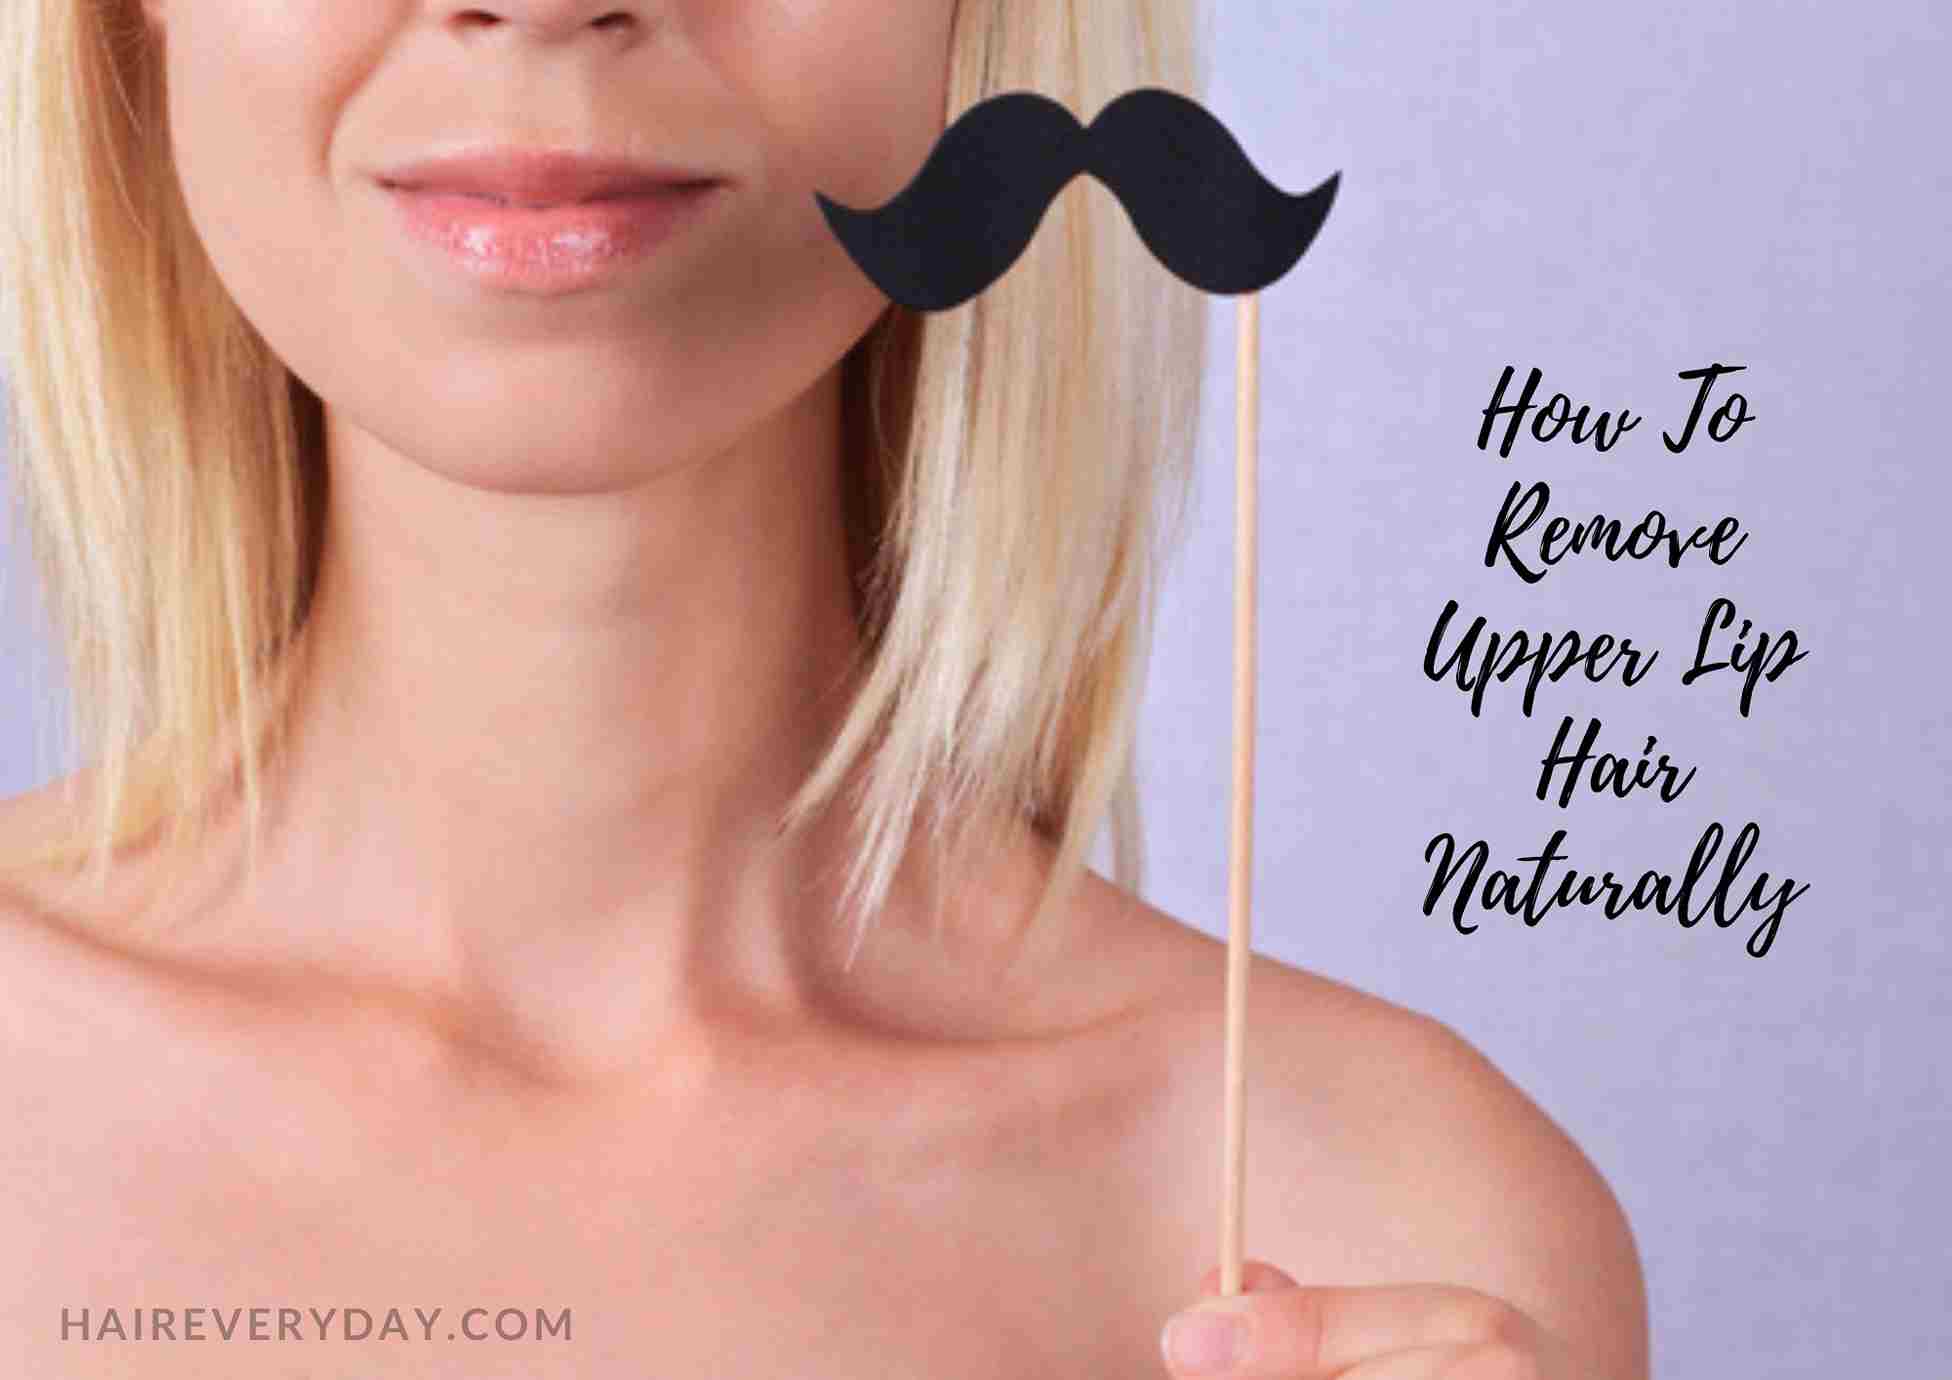 Upper Lip Hair Removal Naturally | 4 Amazing Home Remedies You Can Try  Today - Hair Everyday Review